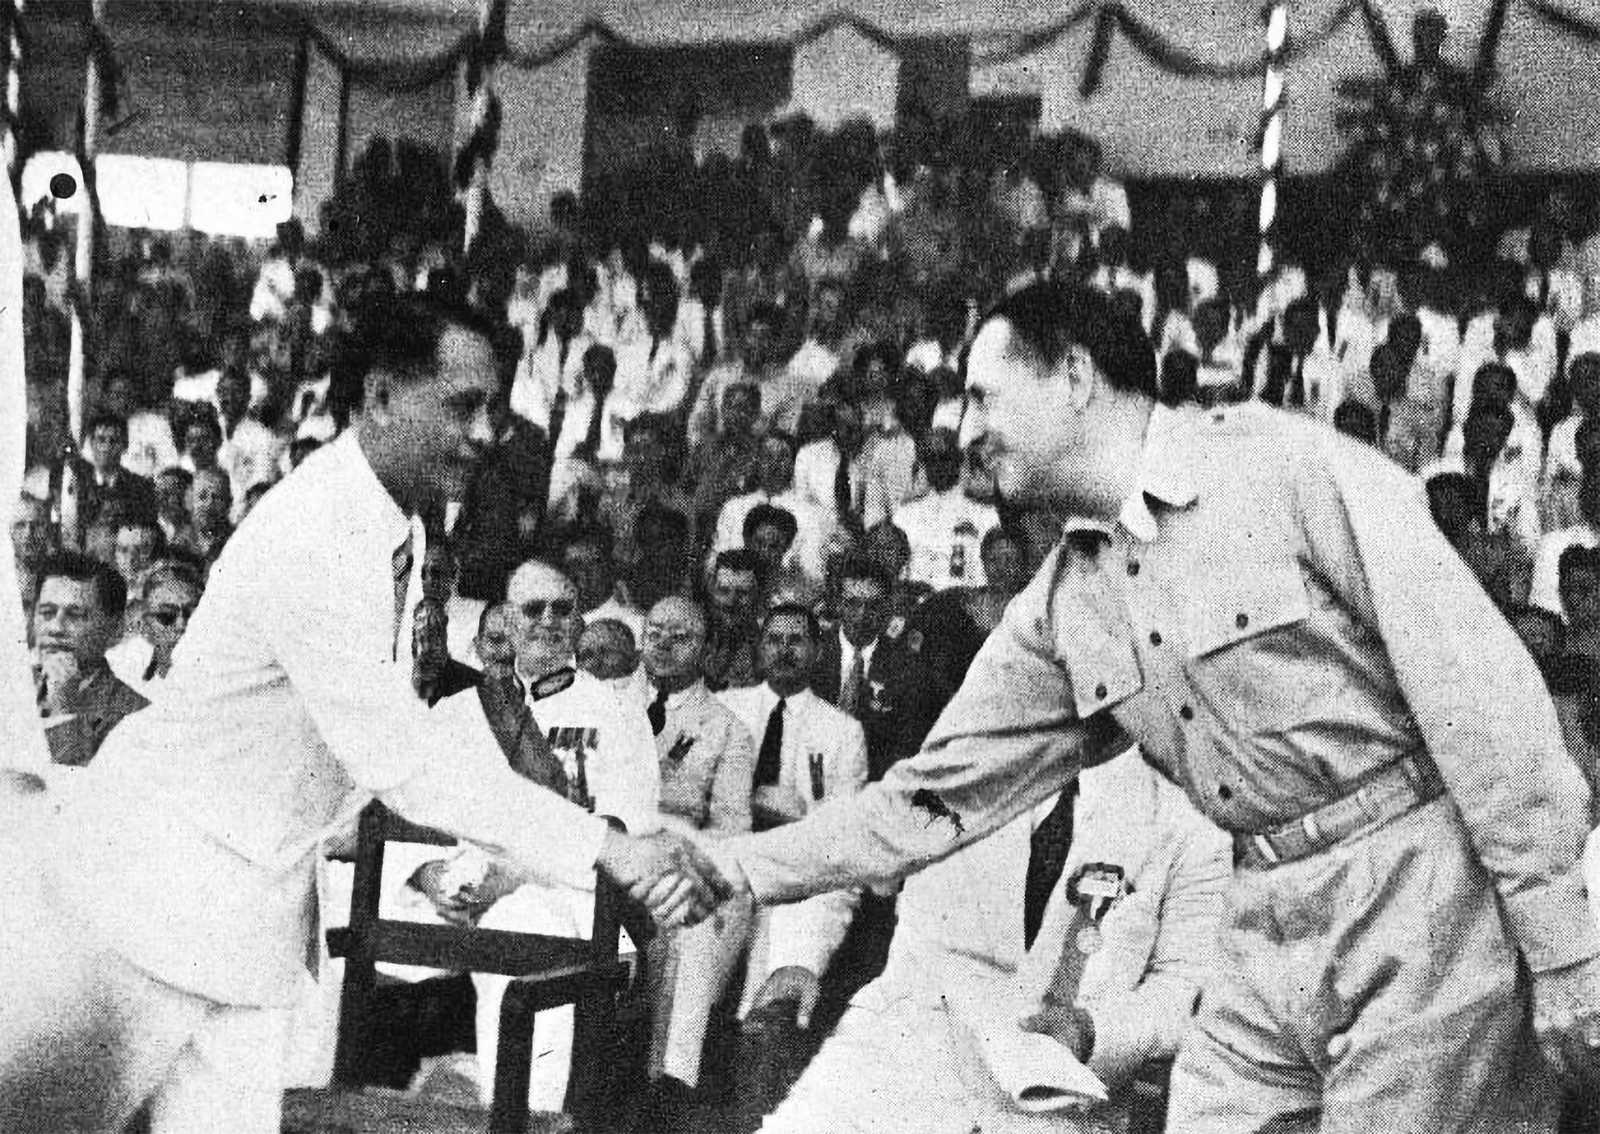 Photo of president Manuel Roxas shaking hands with Douglas MaxArthur in front of a crowd